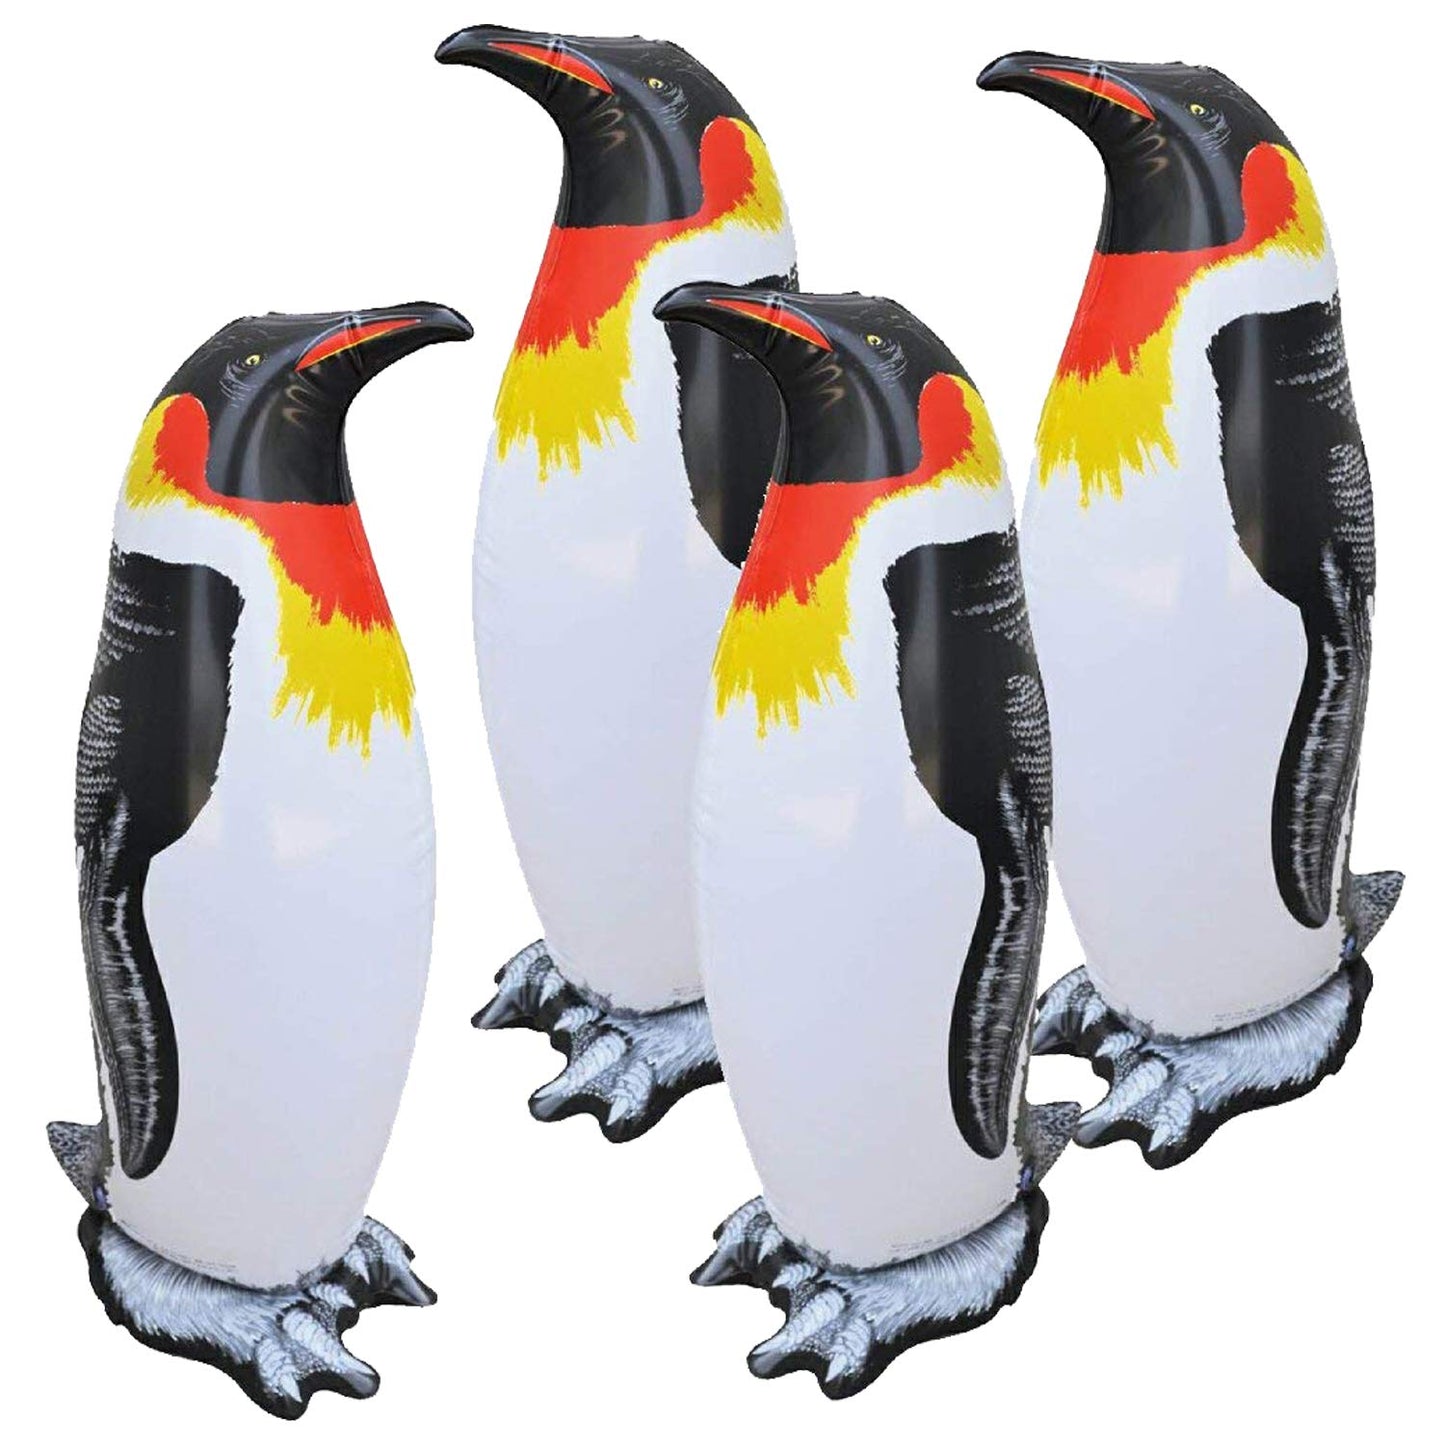 Jet Creations Inflatable Animals Penguin 20” Tall Best for Party Pool Supplies Favors Birthday Gifts for Kids and Adults an-PEN4, Multi